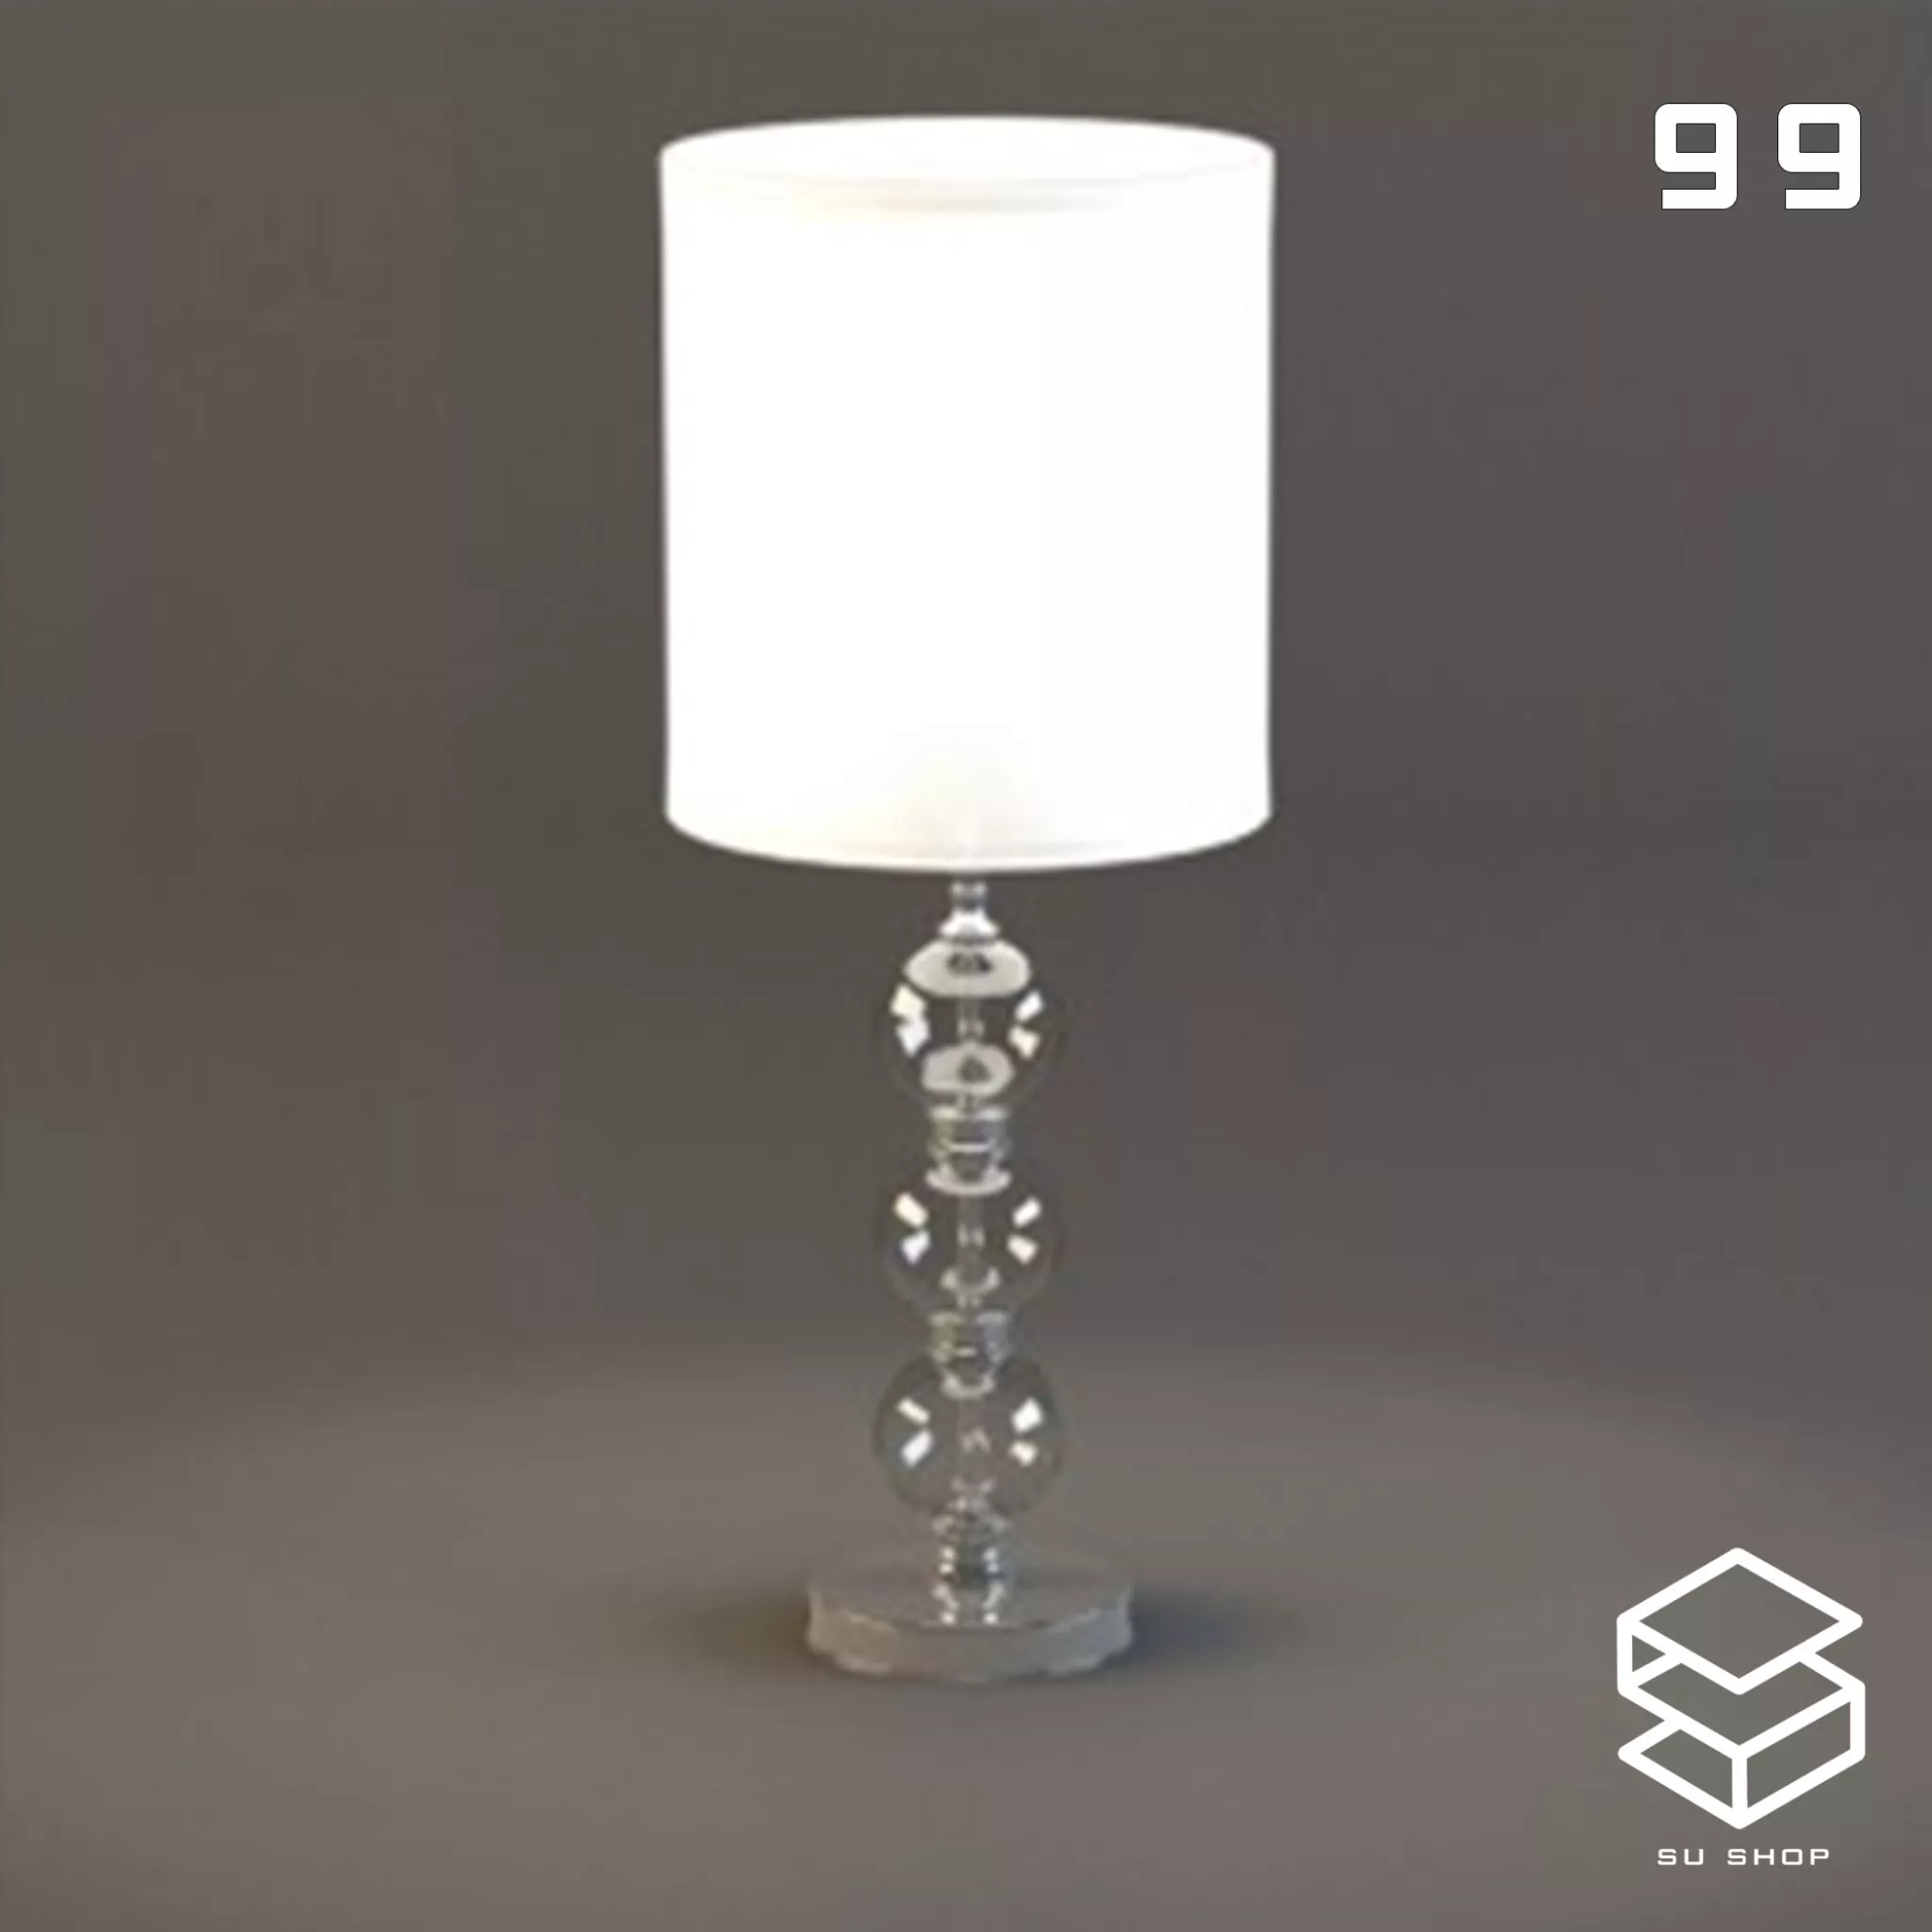 MODERN TABLE LAMP - SKETCHUP 3D MODEL - VRAY OR ENSCAPE - ID14898